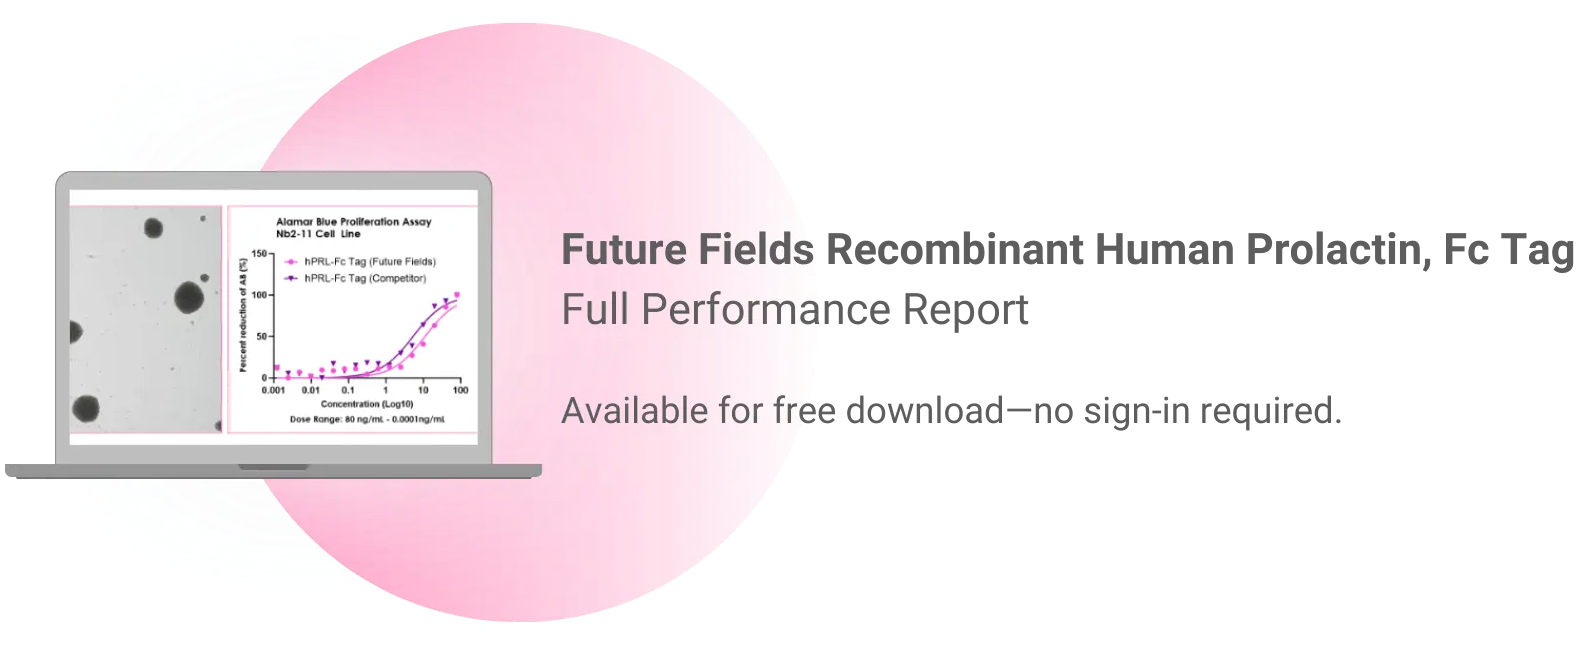 Future Fields Recombinant Human Prolactin, Fc tag (PRL-Fc) performance report preview